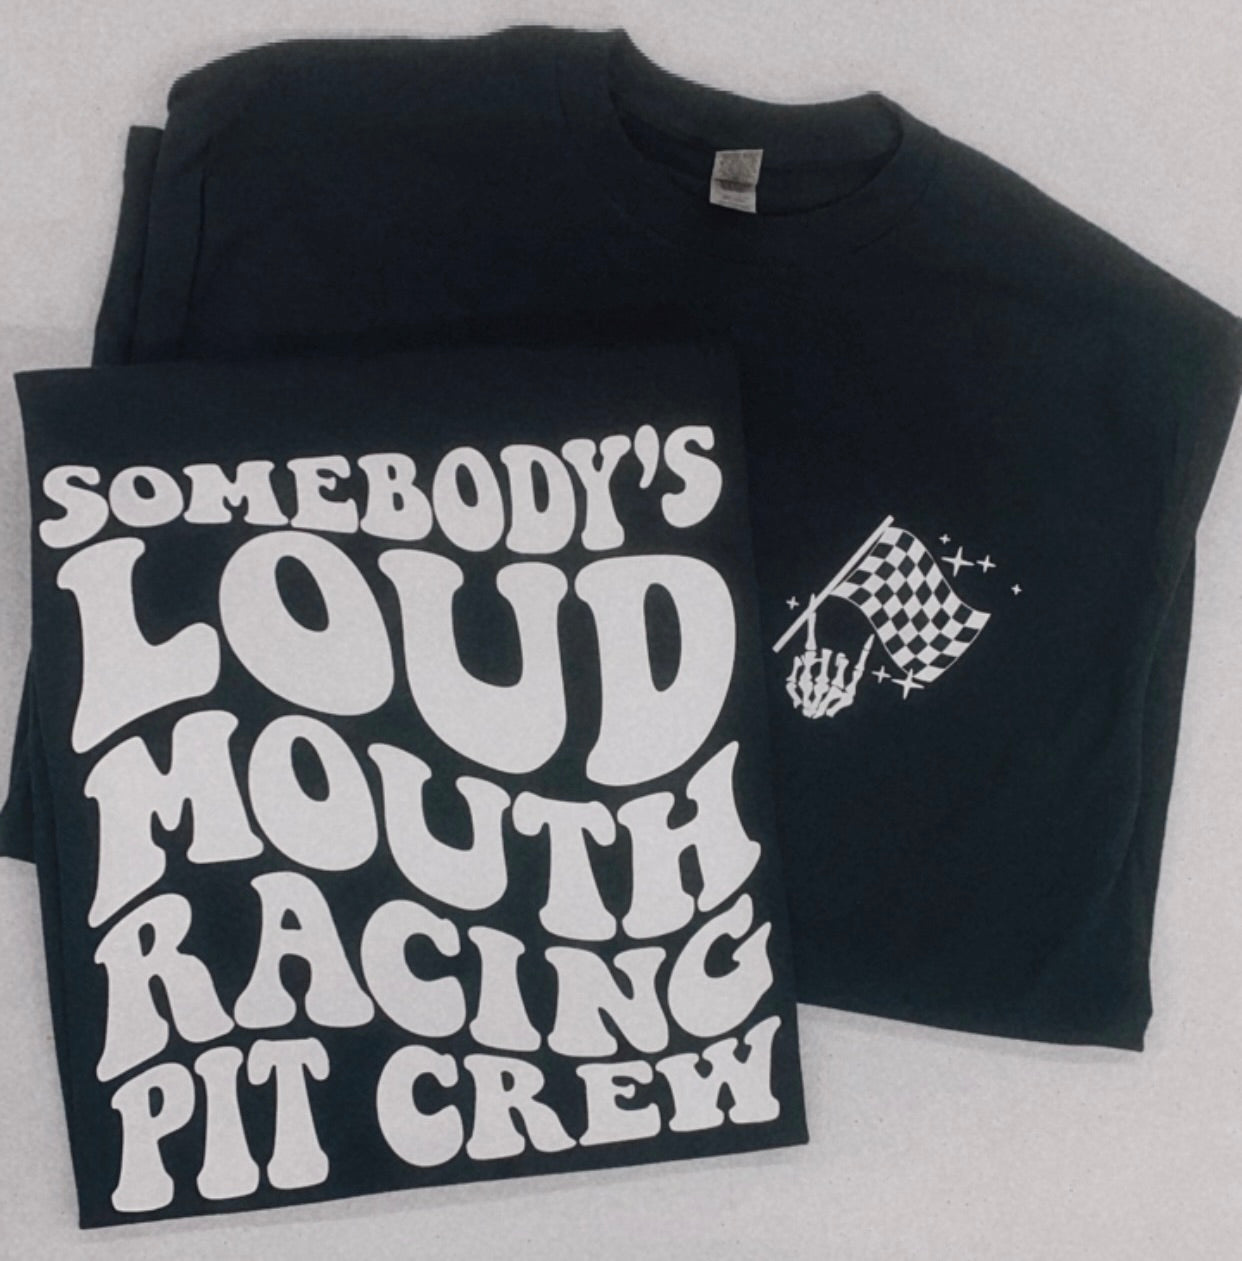 Somebody's Loud Mouth Racing Pit Crew T-Shirt